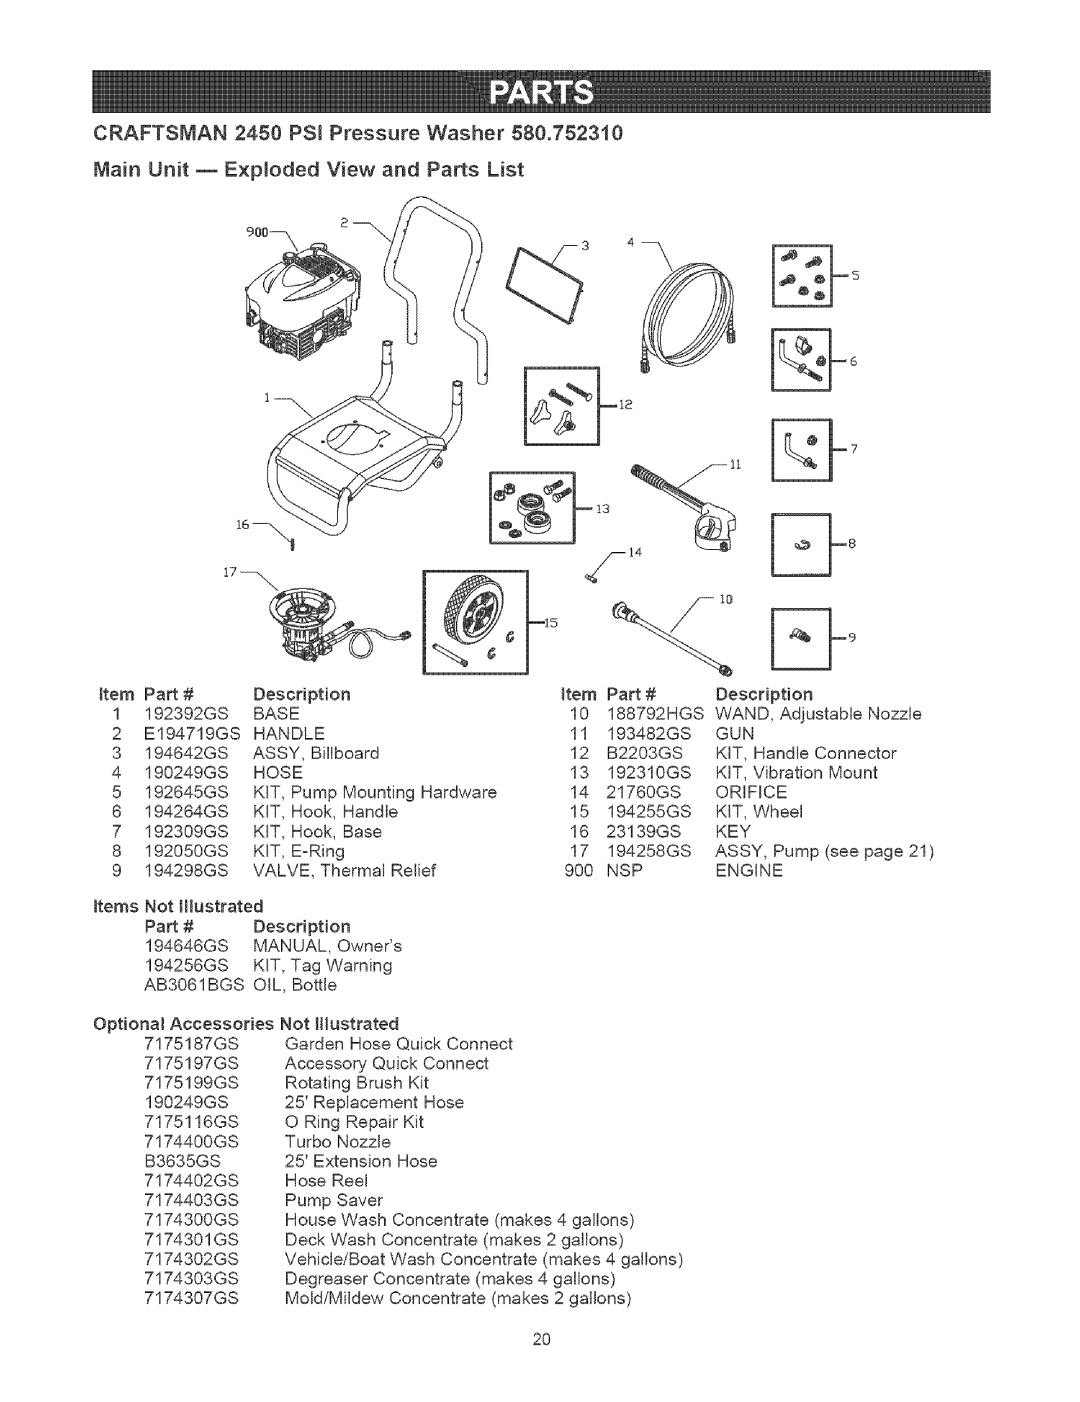 Craftsman 580.75231 owner manual 4/-14, CRAFTSMAN 2450 PS_ Pressure Washer, Main Unit m Exploded View and Parts List 